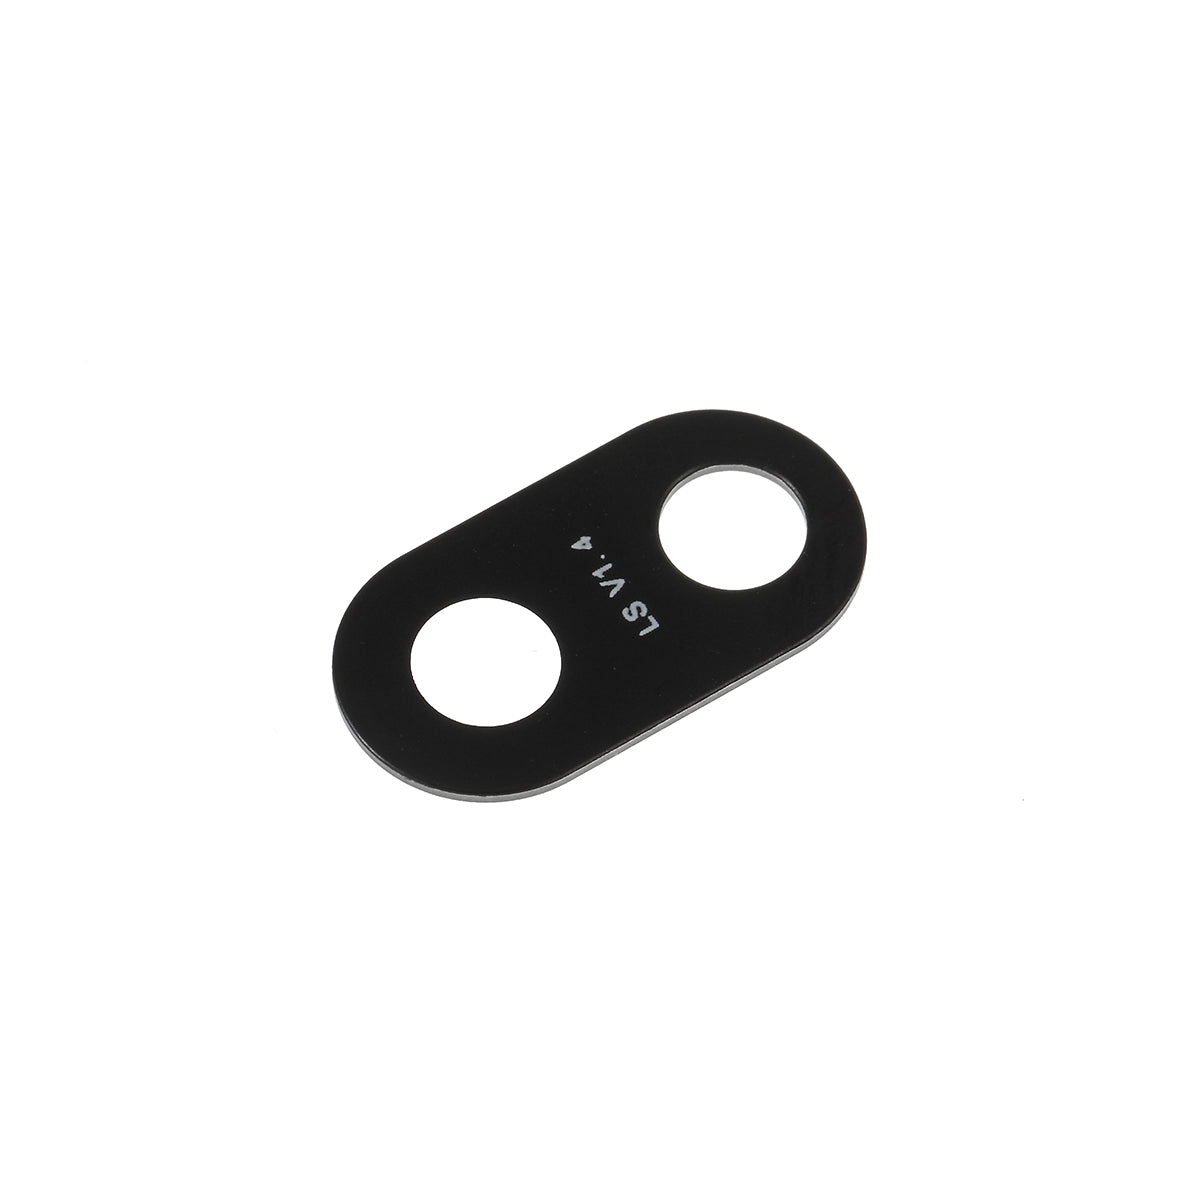 OEM Rear Back Camera Lens Cover with Adhesive Sticker for Motorola Moto G7 Play - Black